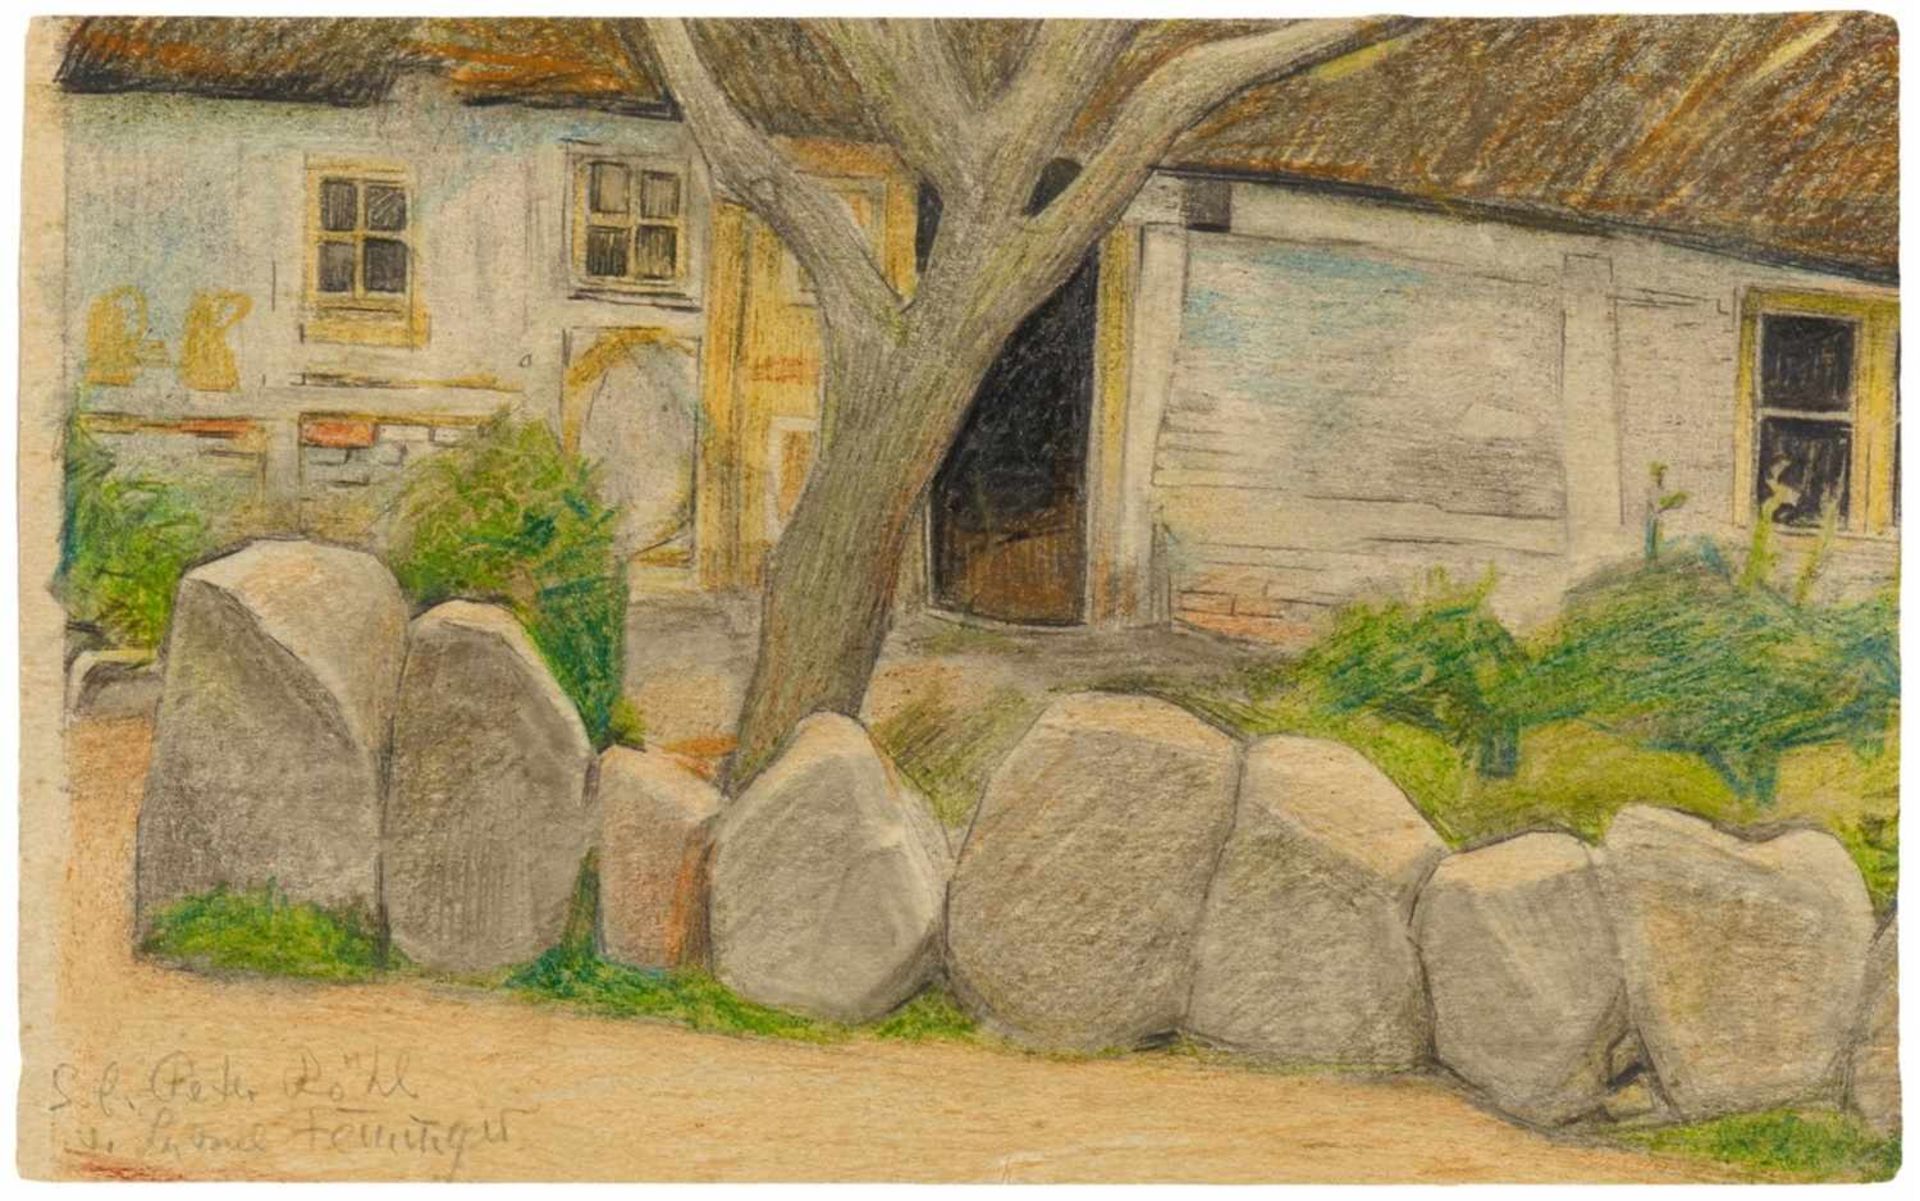 Lyonel FeiningerVillage House with Tree and Boulders